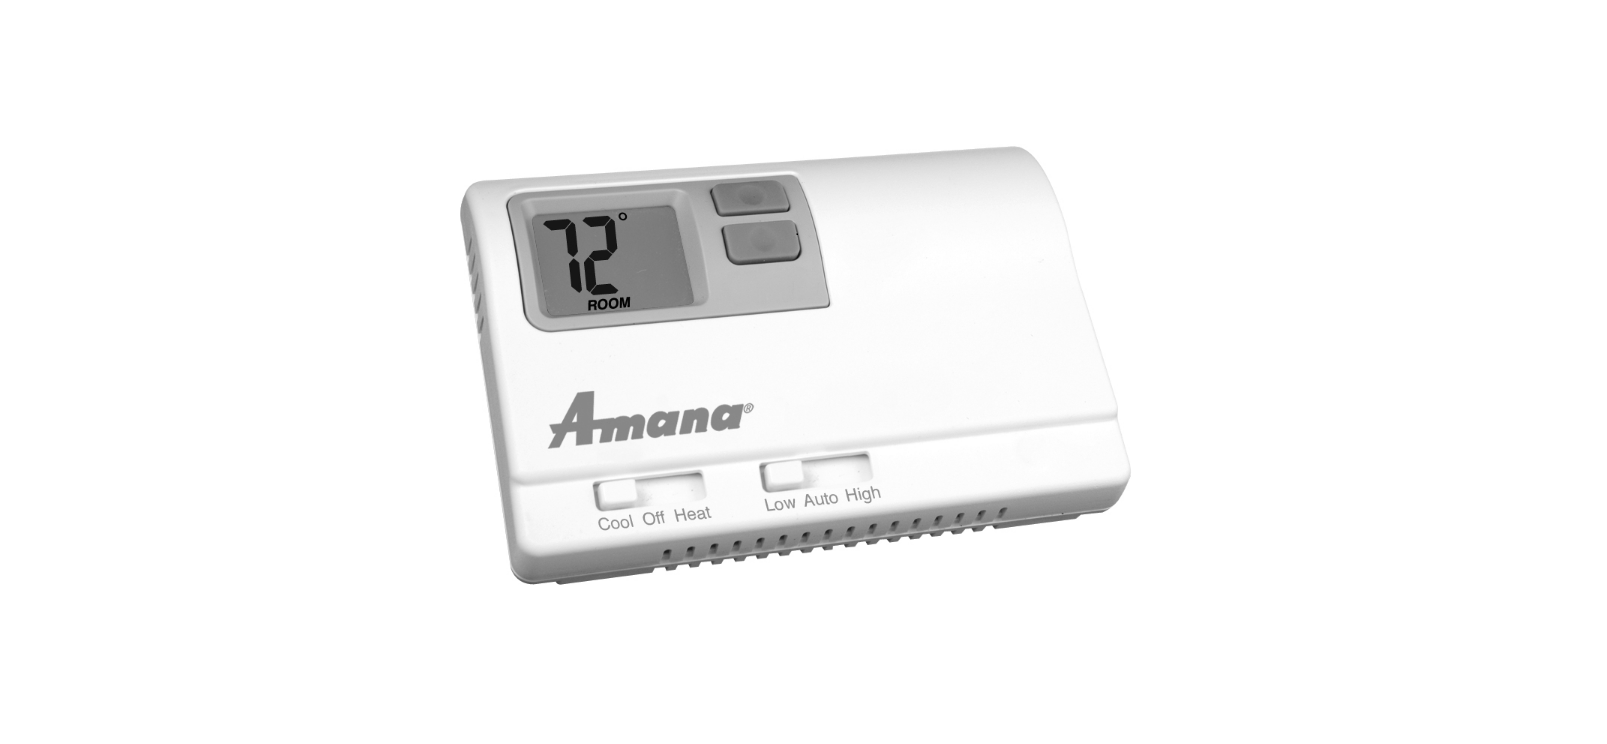 AMANA 2246003 Non-Programmable Electronic Thermostat Installation Guide